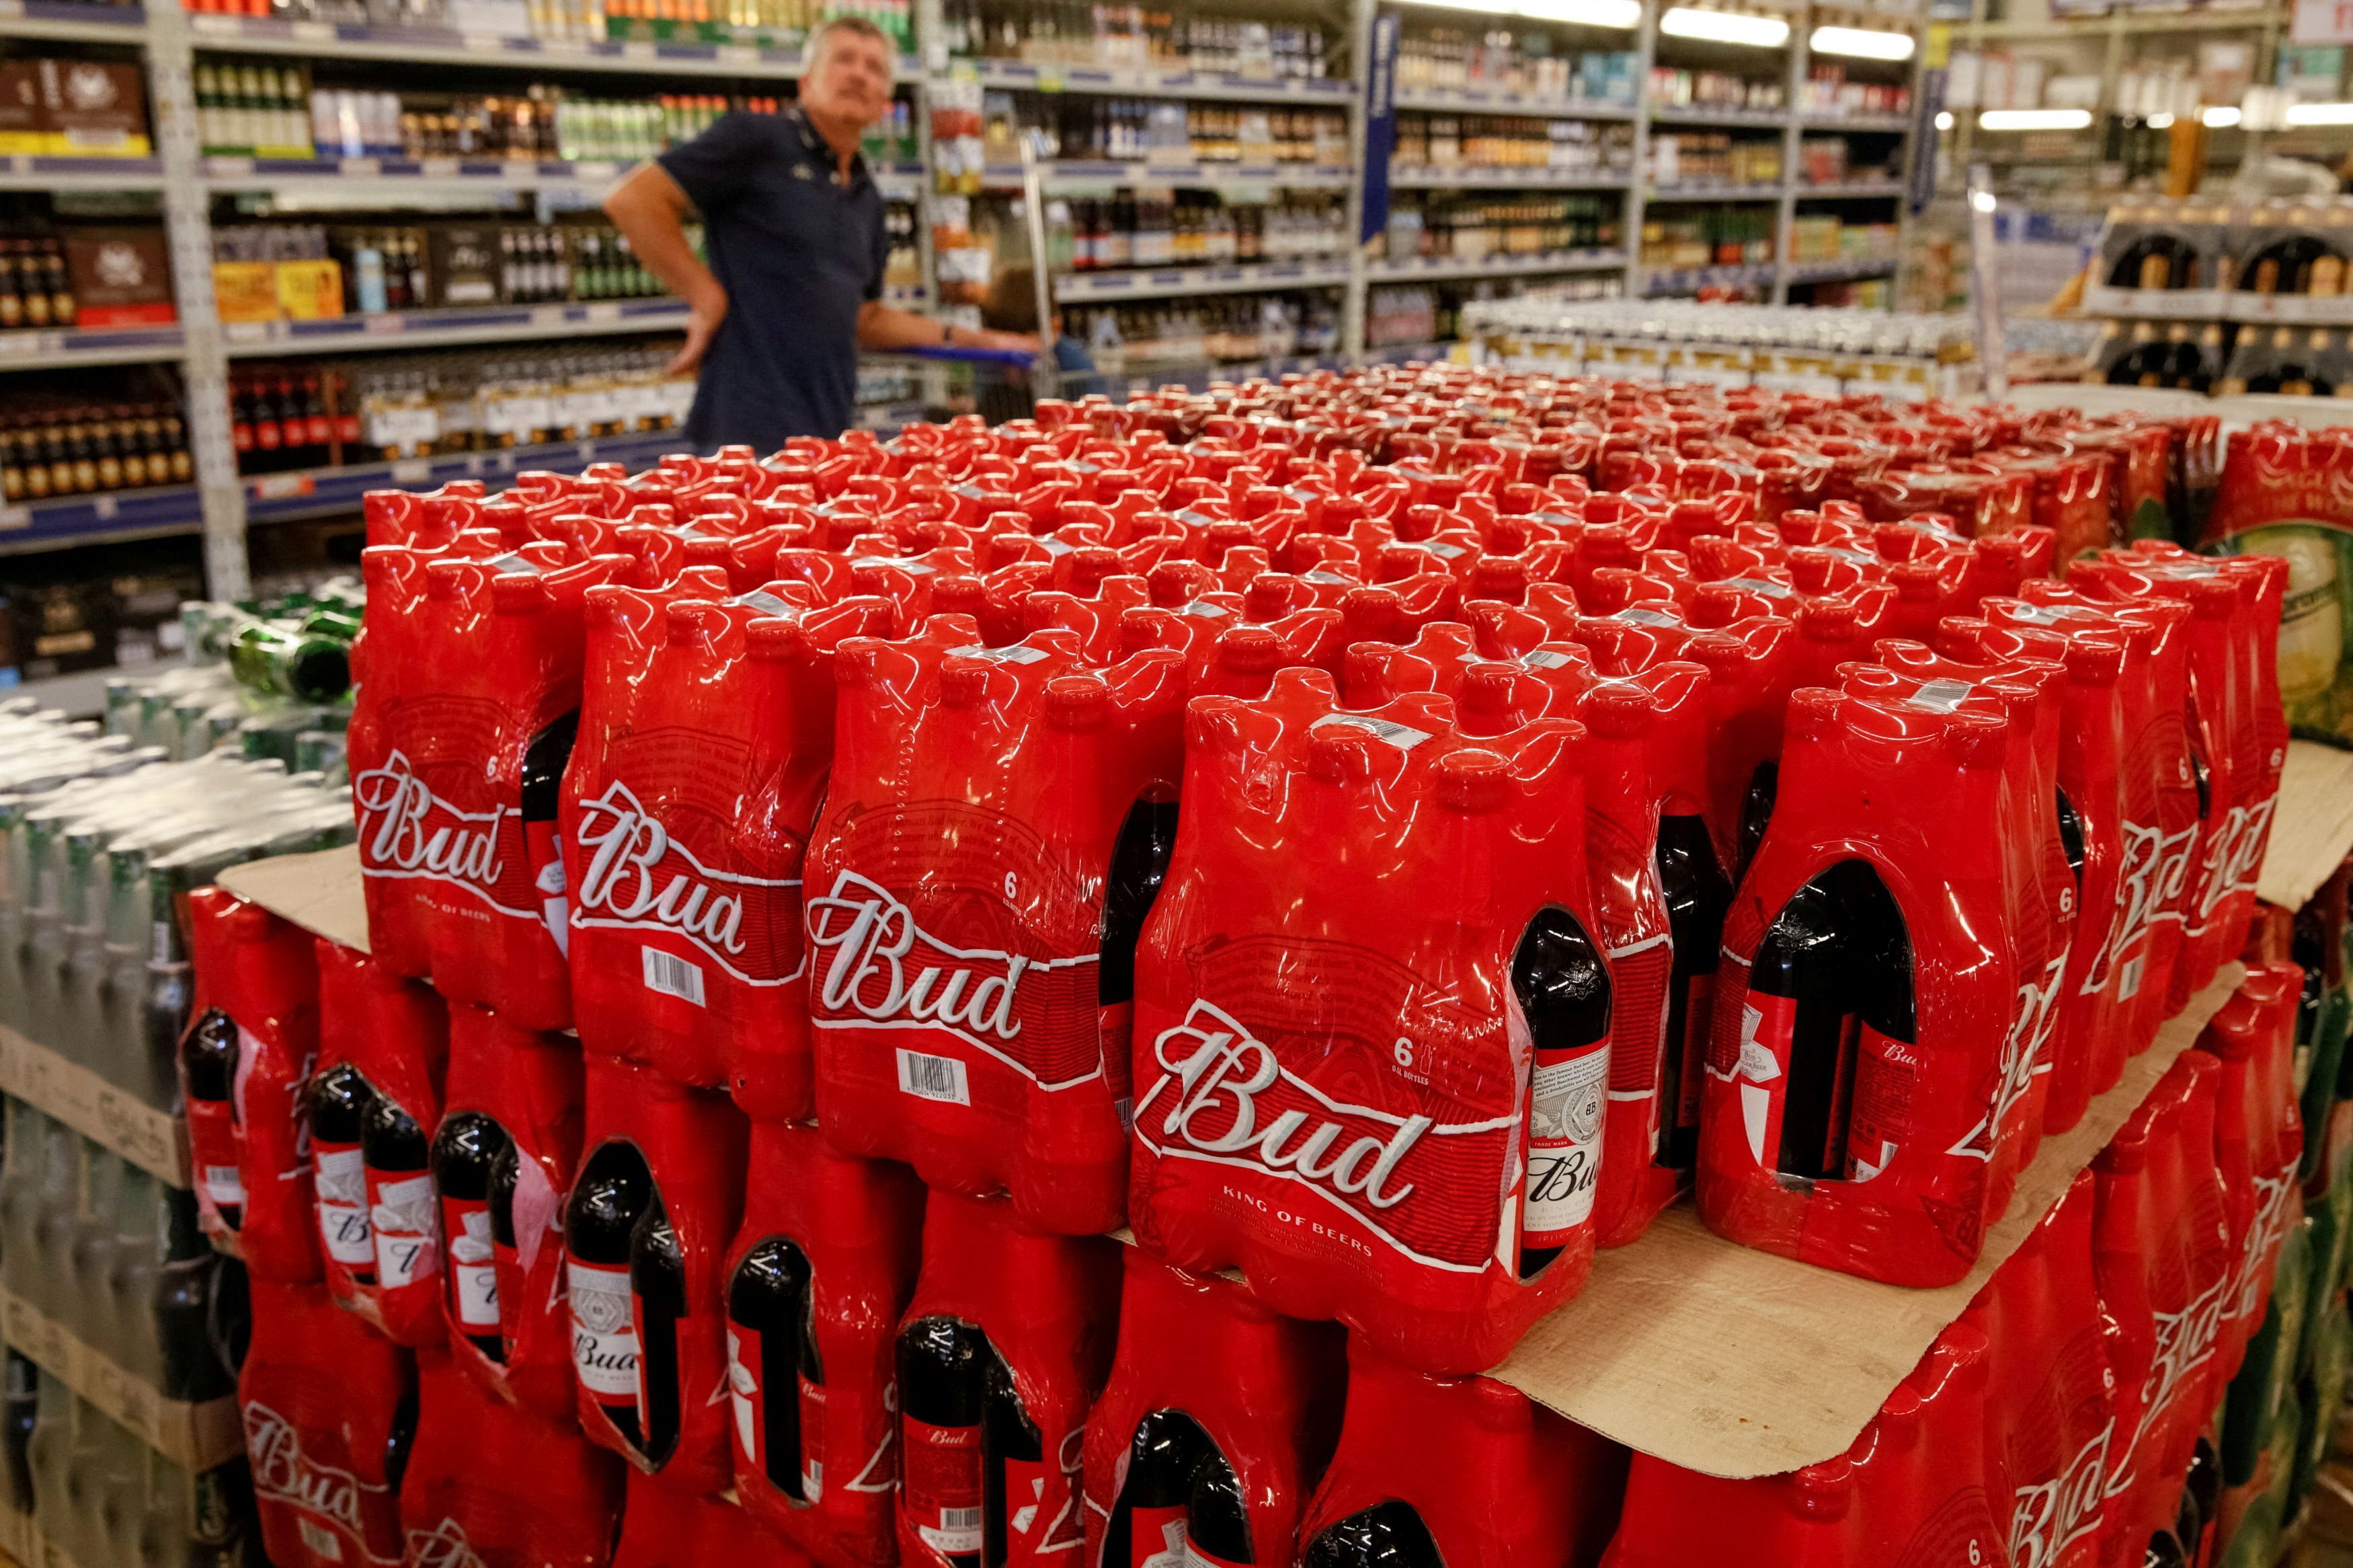 Packs of Bud beer are displayed for sale at Metro cash and carry store in Kiev